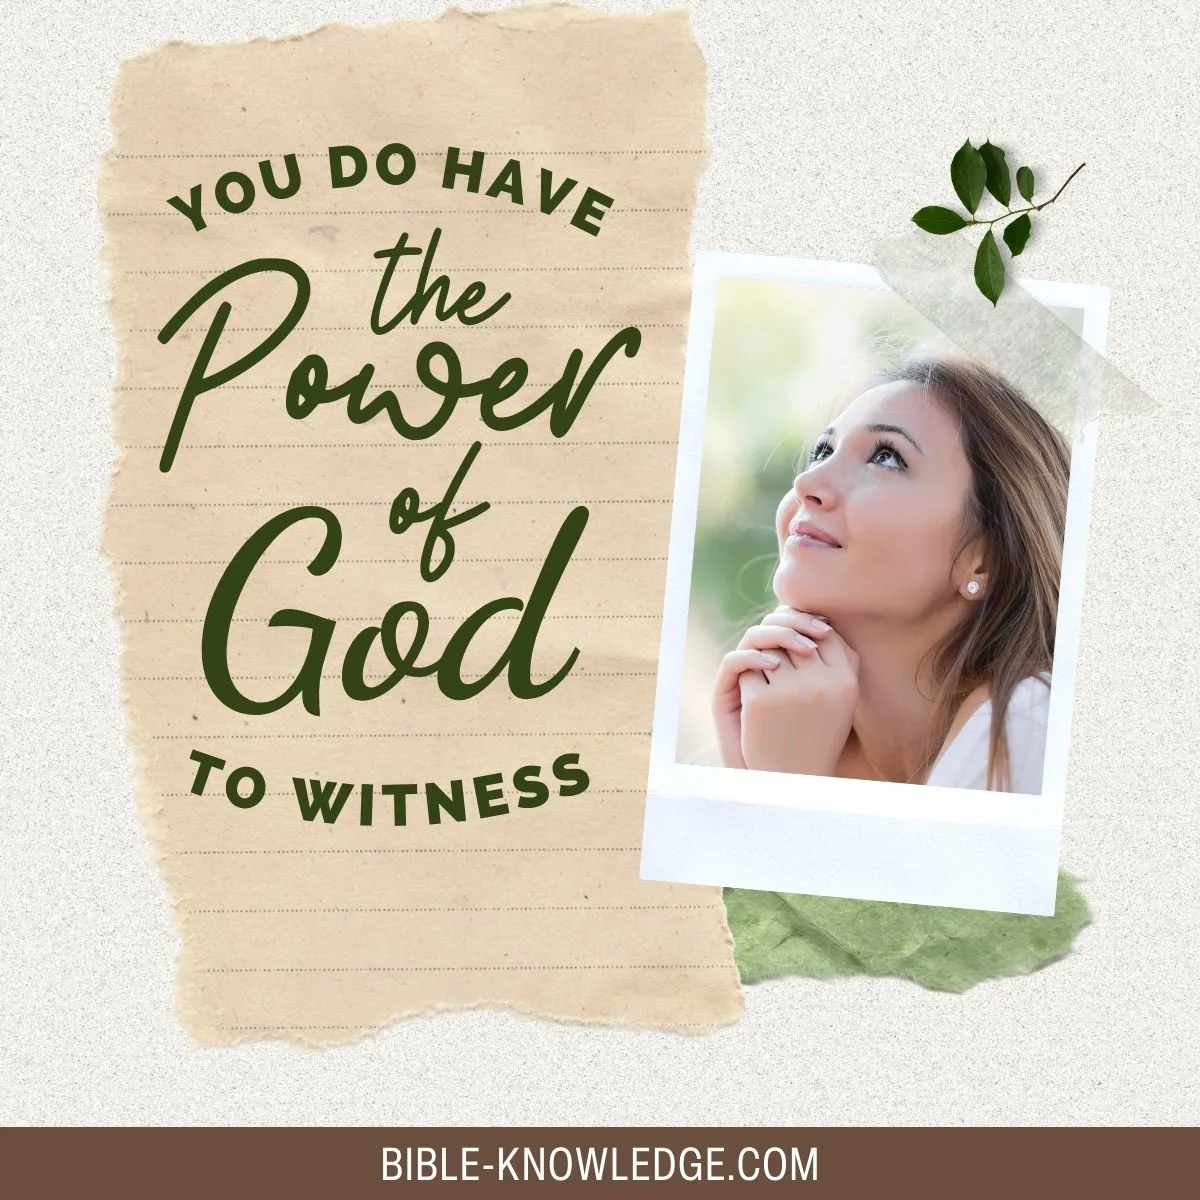 You Do Have the Power of God to Witness